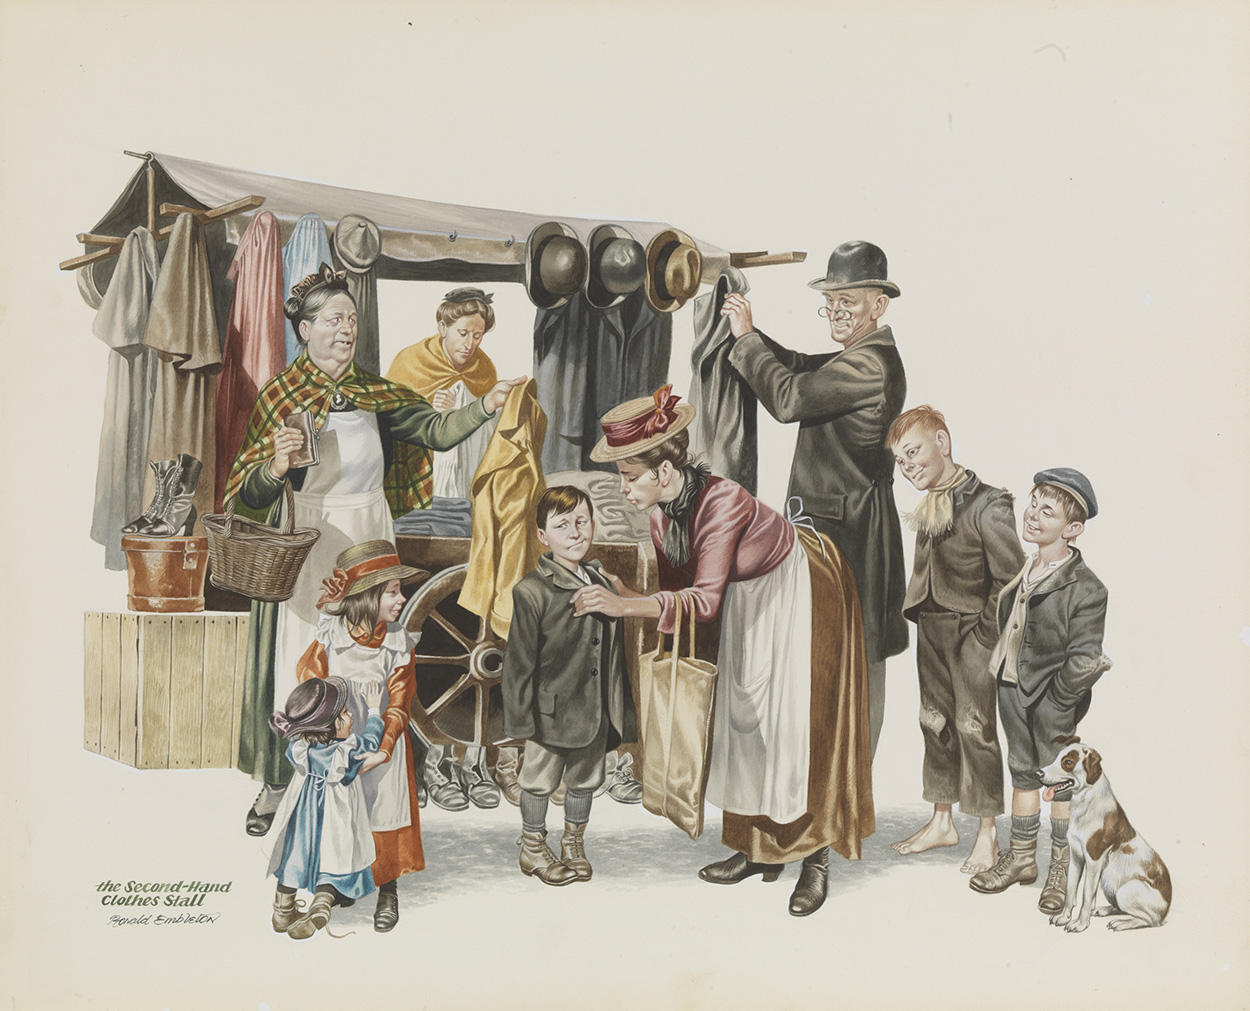 Second Hand Clothes Store (Original) (Signed) art by Victorian and Edwardian Britain (Ron Embleton) at The Illustration Art Gallery